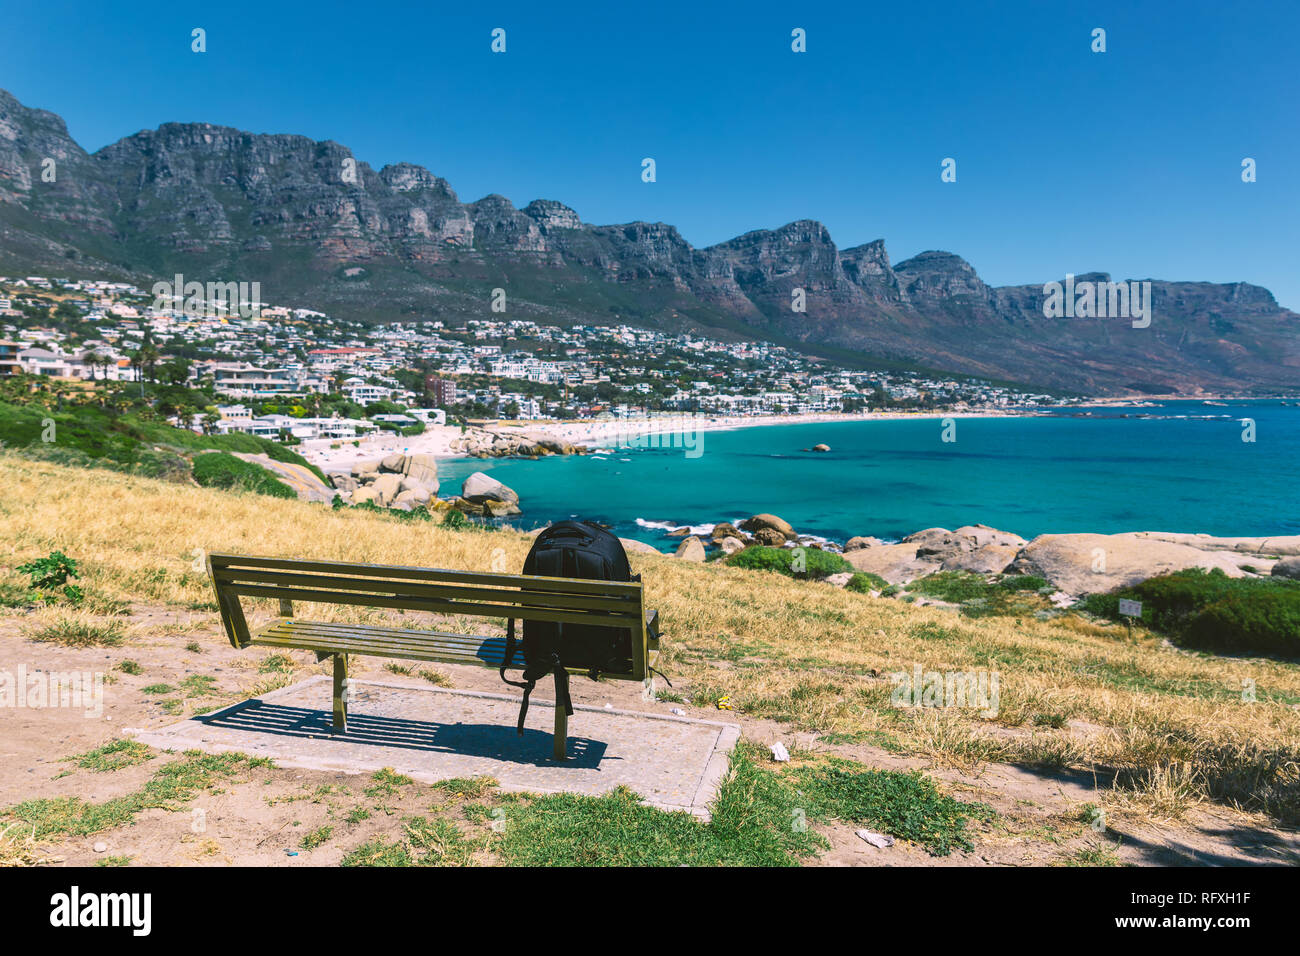 Backpack of lonely traveller on a bench with a view of Camps bay beautiful beach in Cape Town, South Africa Stock Photo